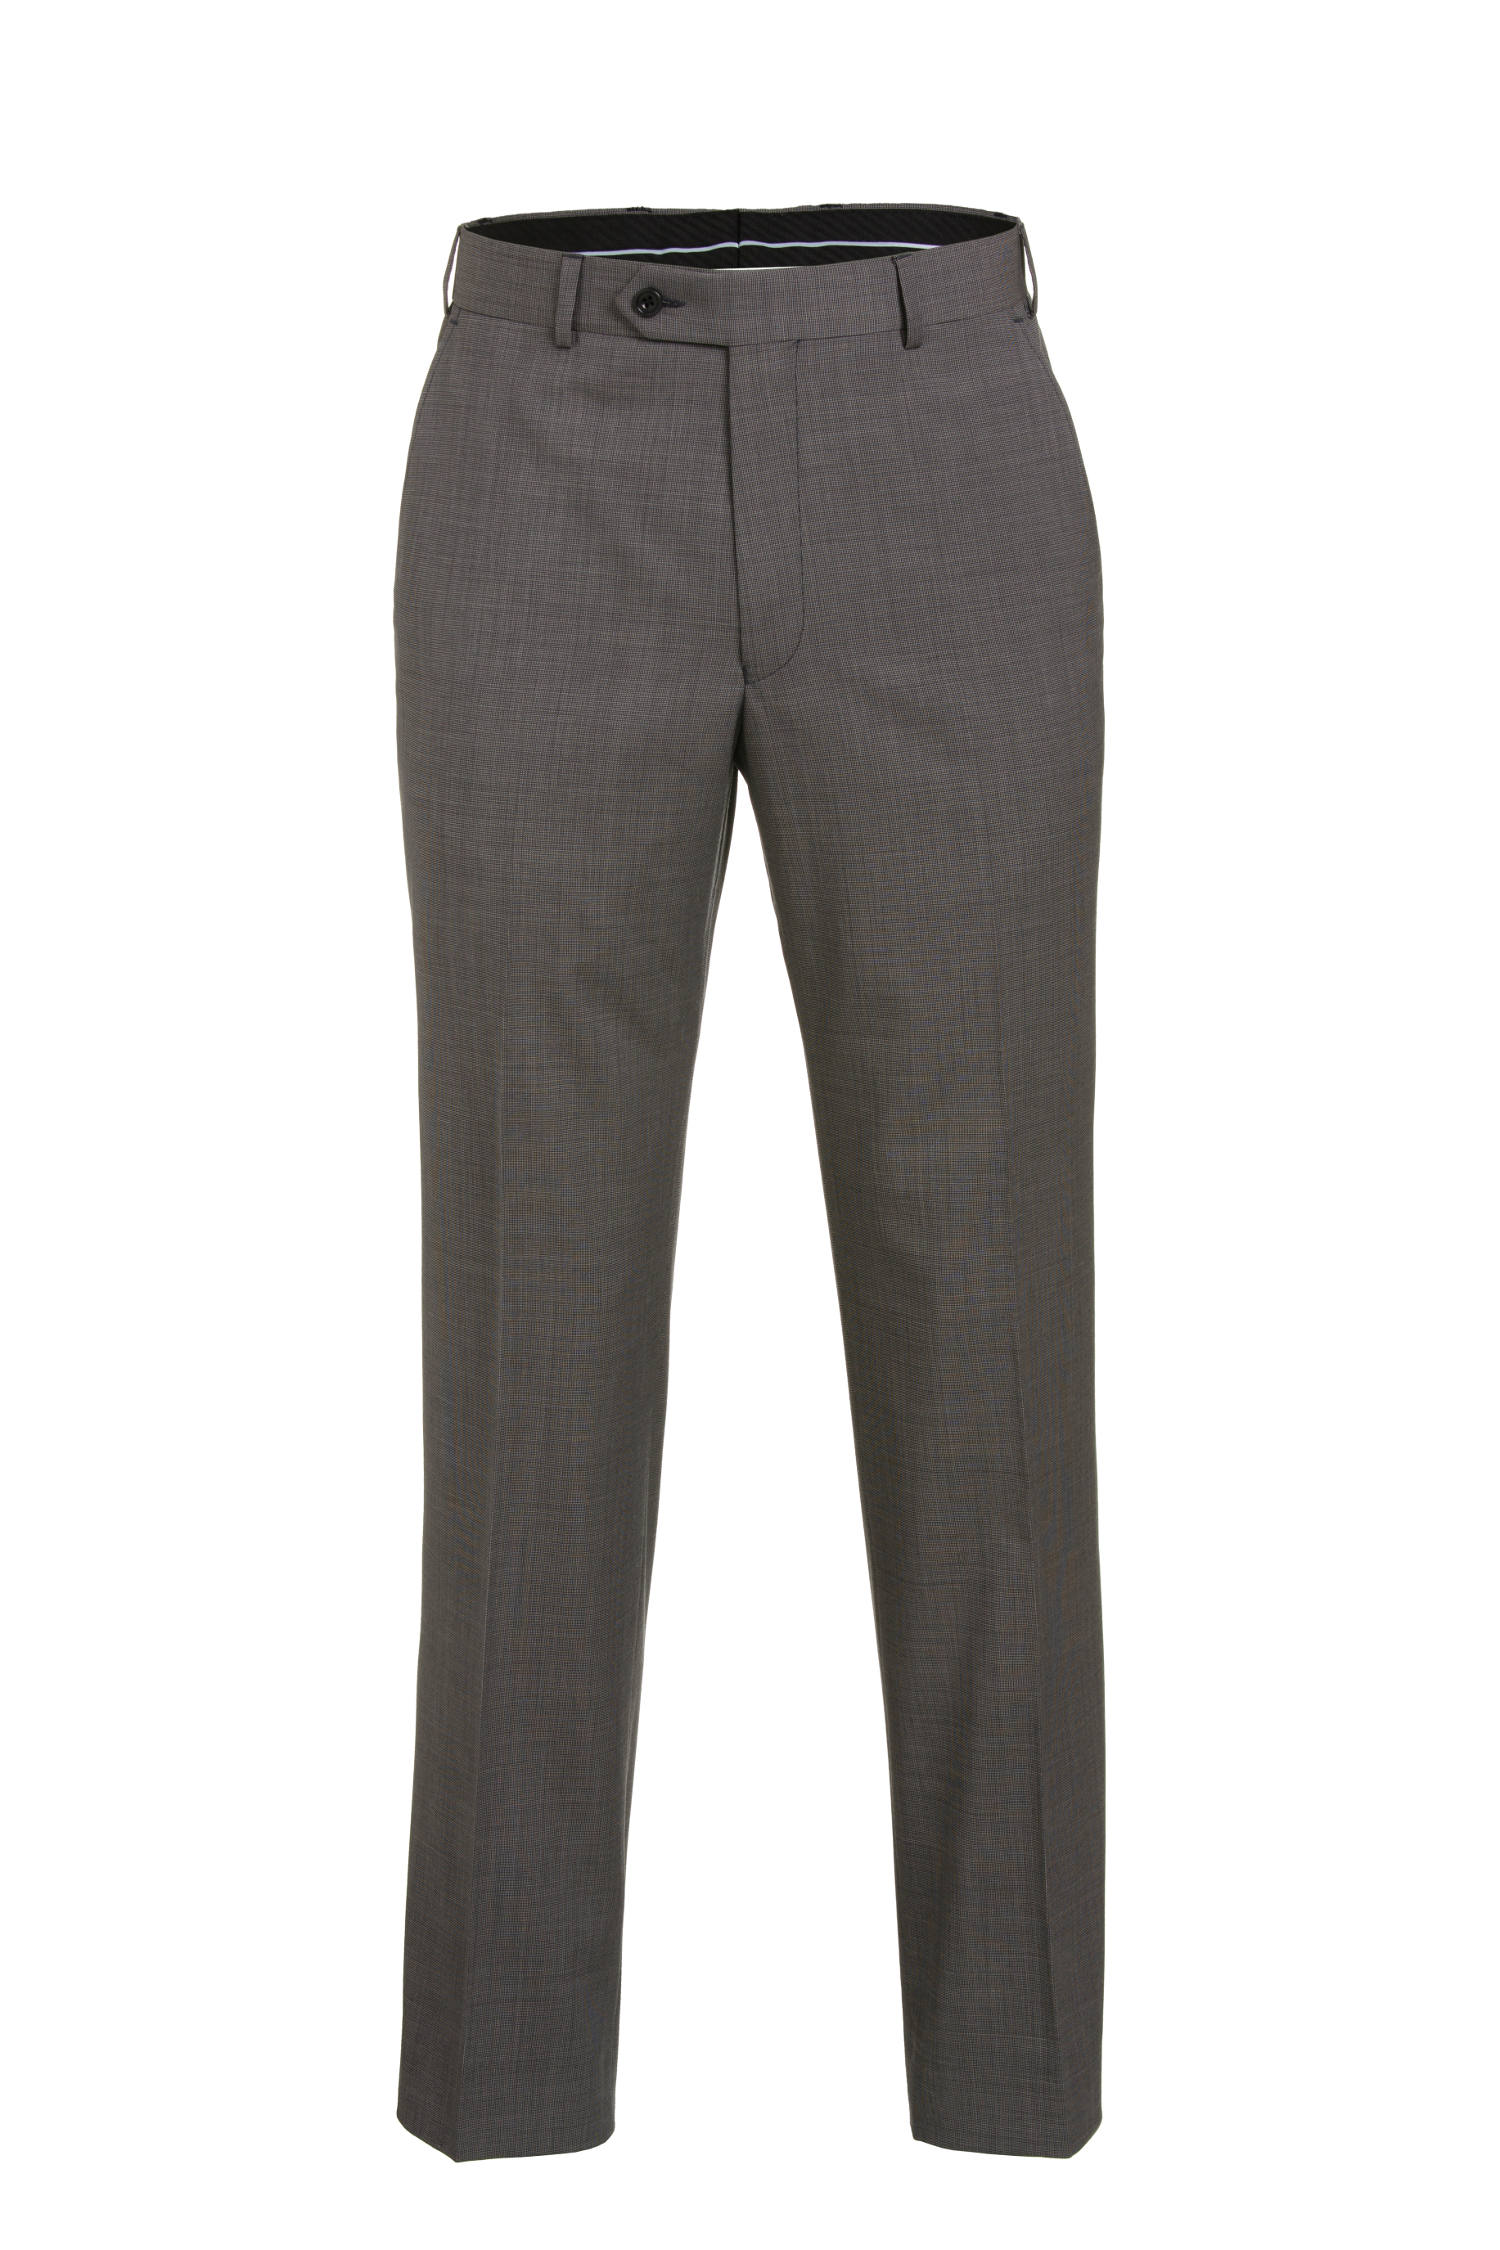 Grey Silver Mohair Suit - Tom Murphy's Formal and Menswear